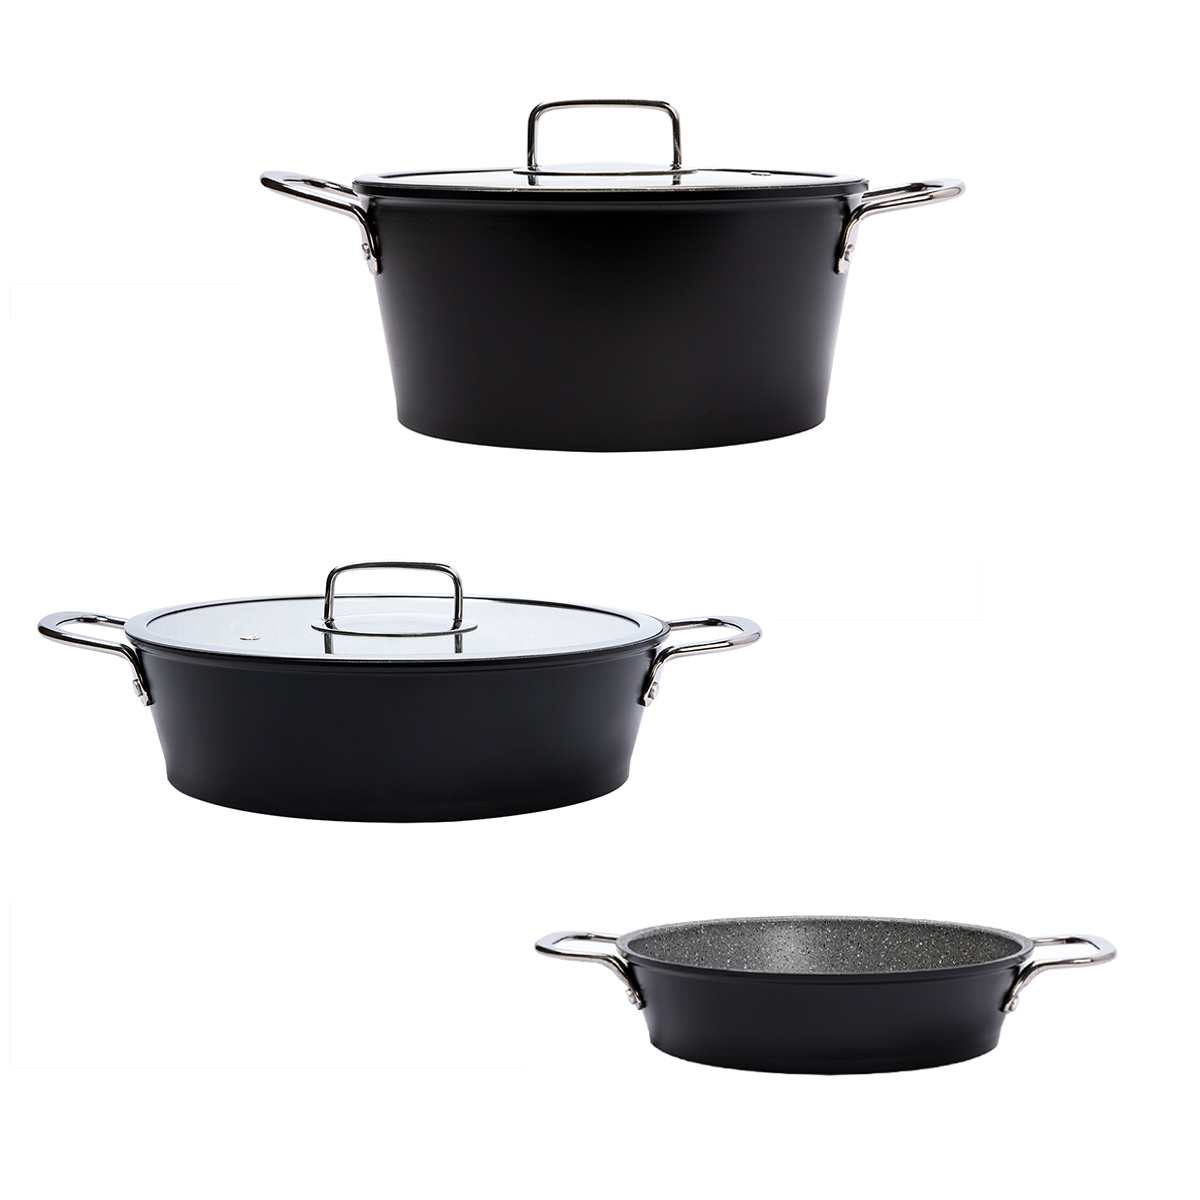 Serenk excellence 5 pieces granite cookware set